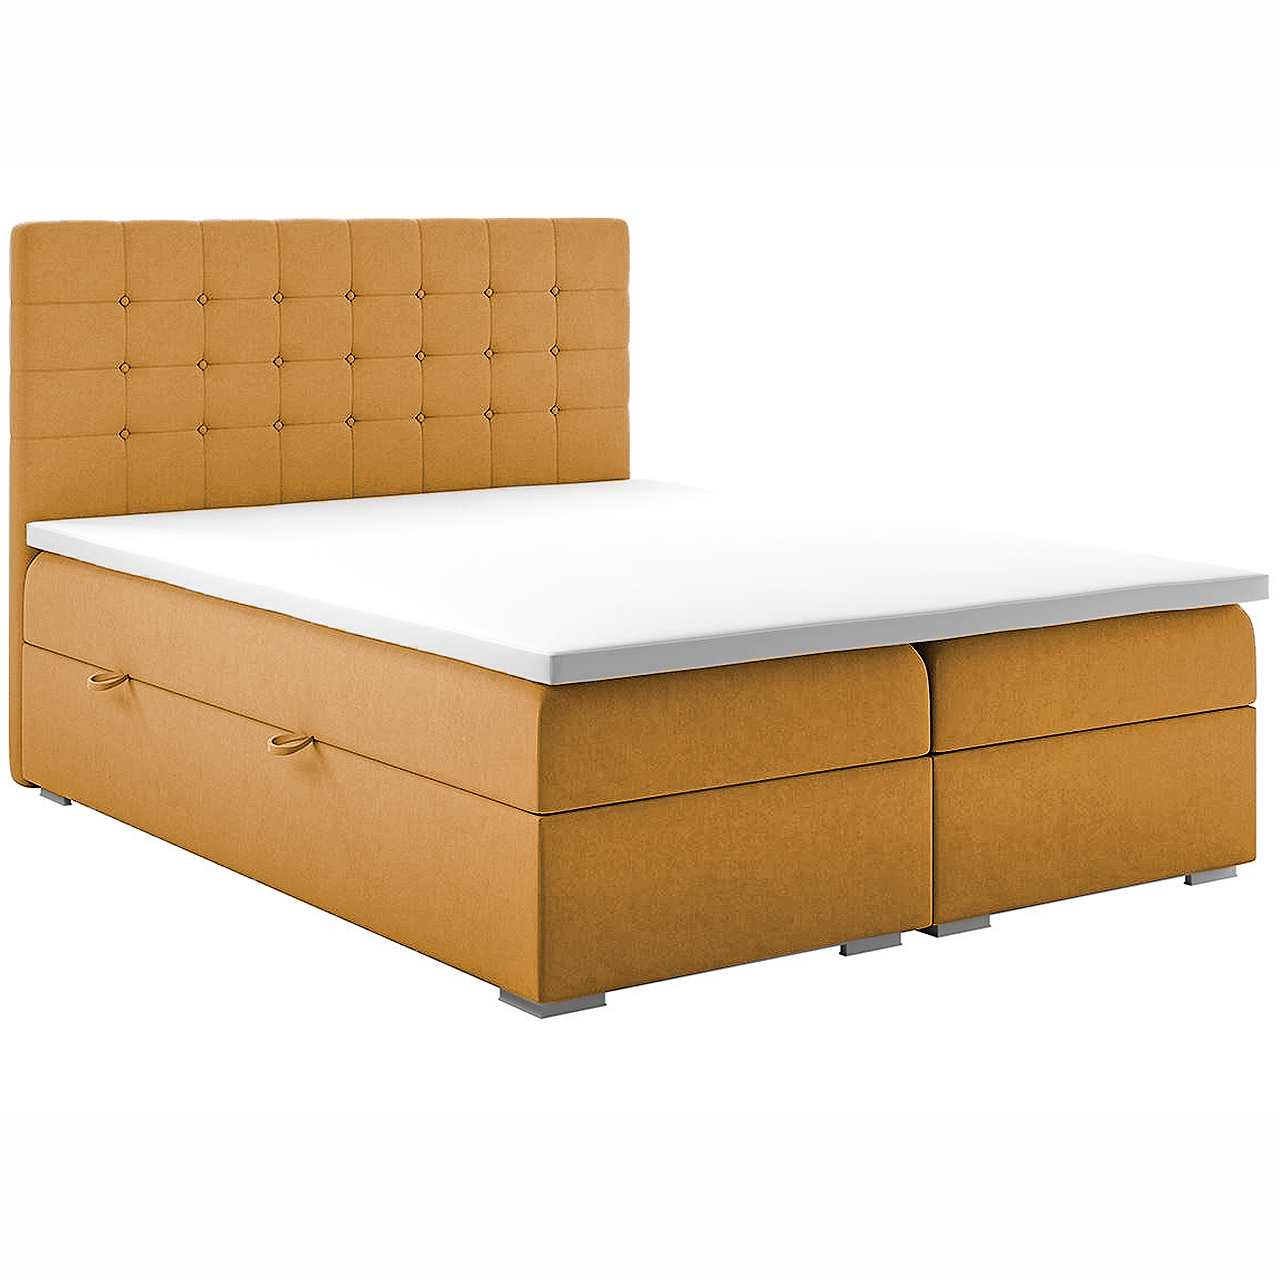 Upholstered bed CLAUDIS 120x200 riviera 41